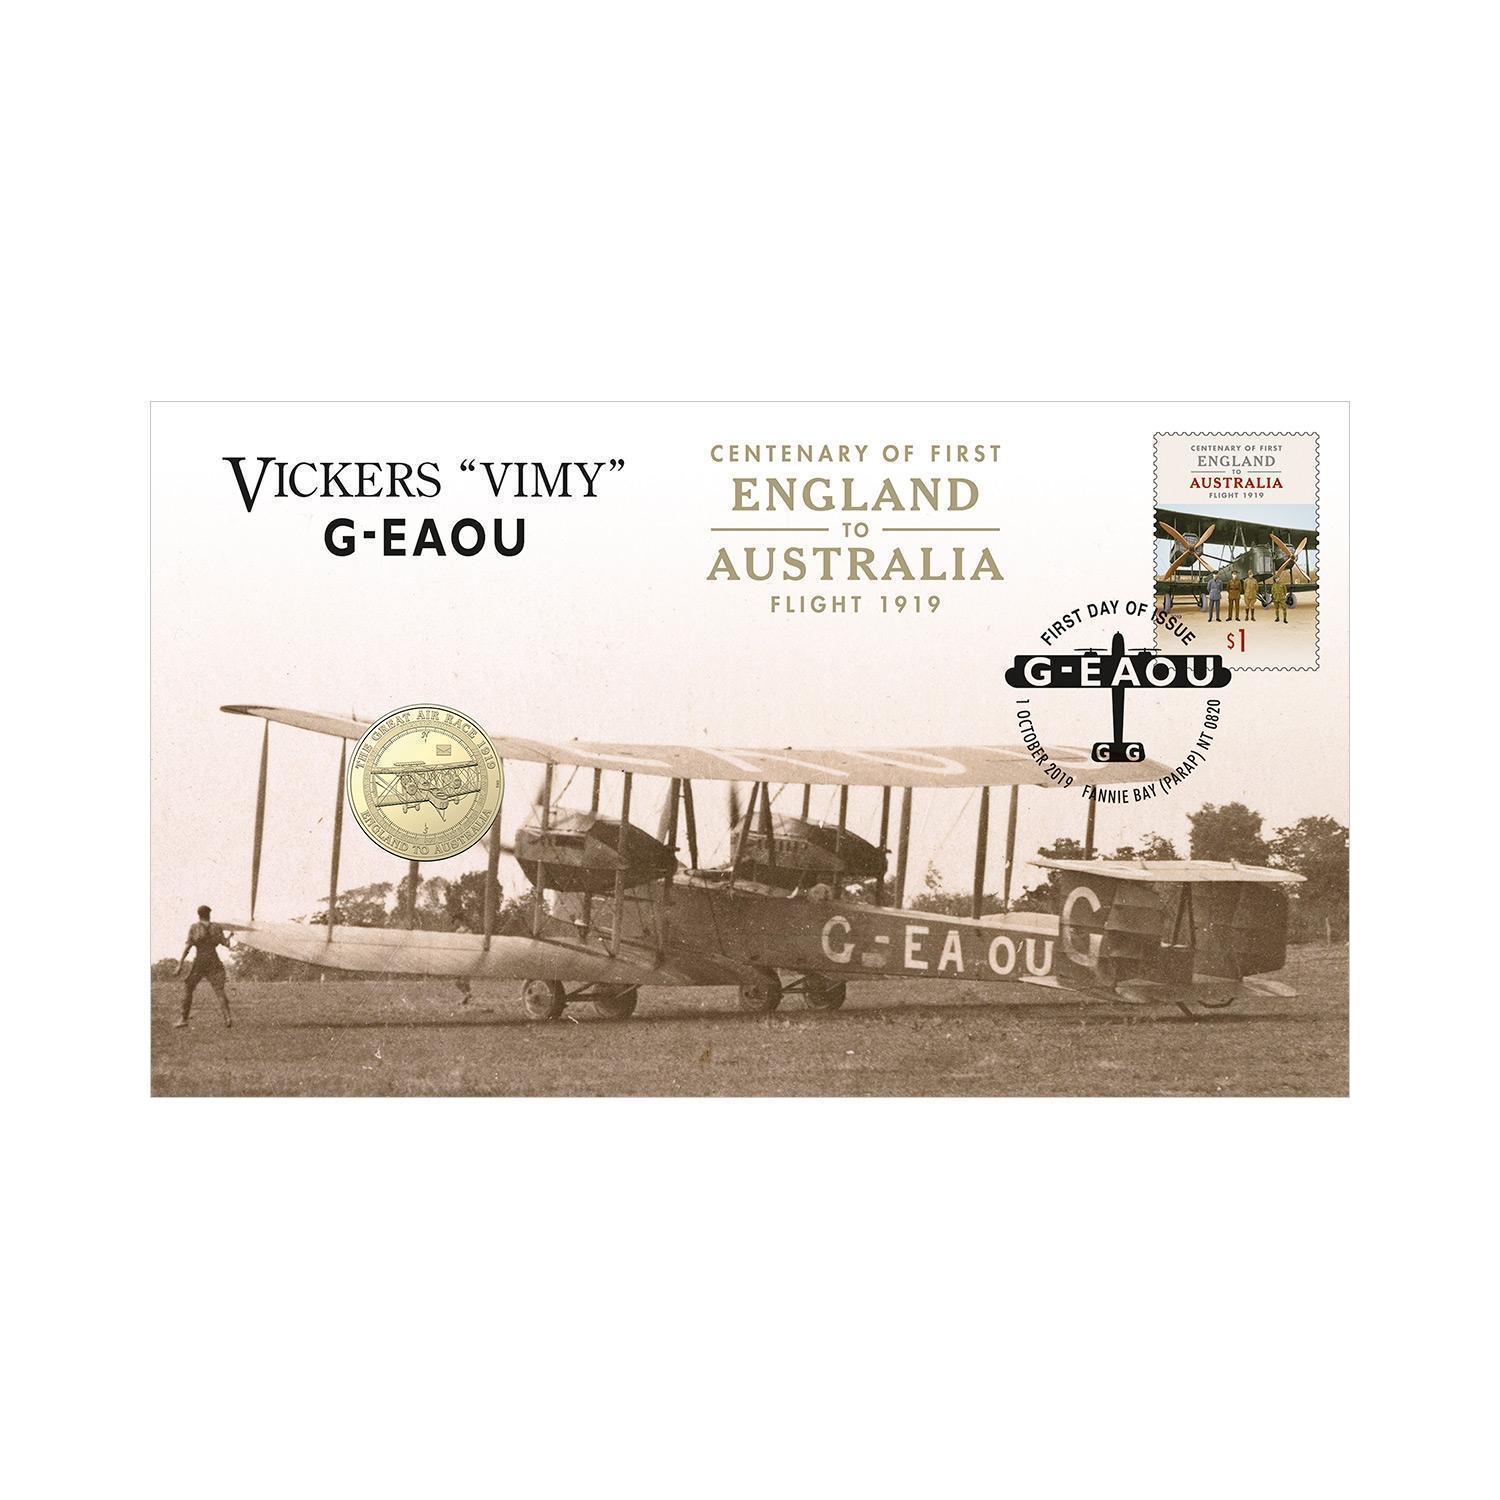 2019 $1 England to Australia First Flight Centenary Vikers Vimy G-EAOU Stamp & Coin Cover PNC